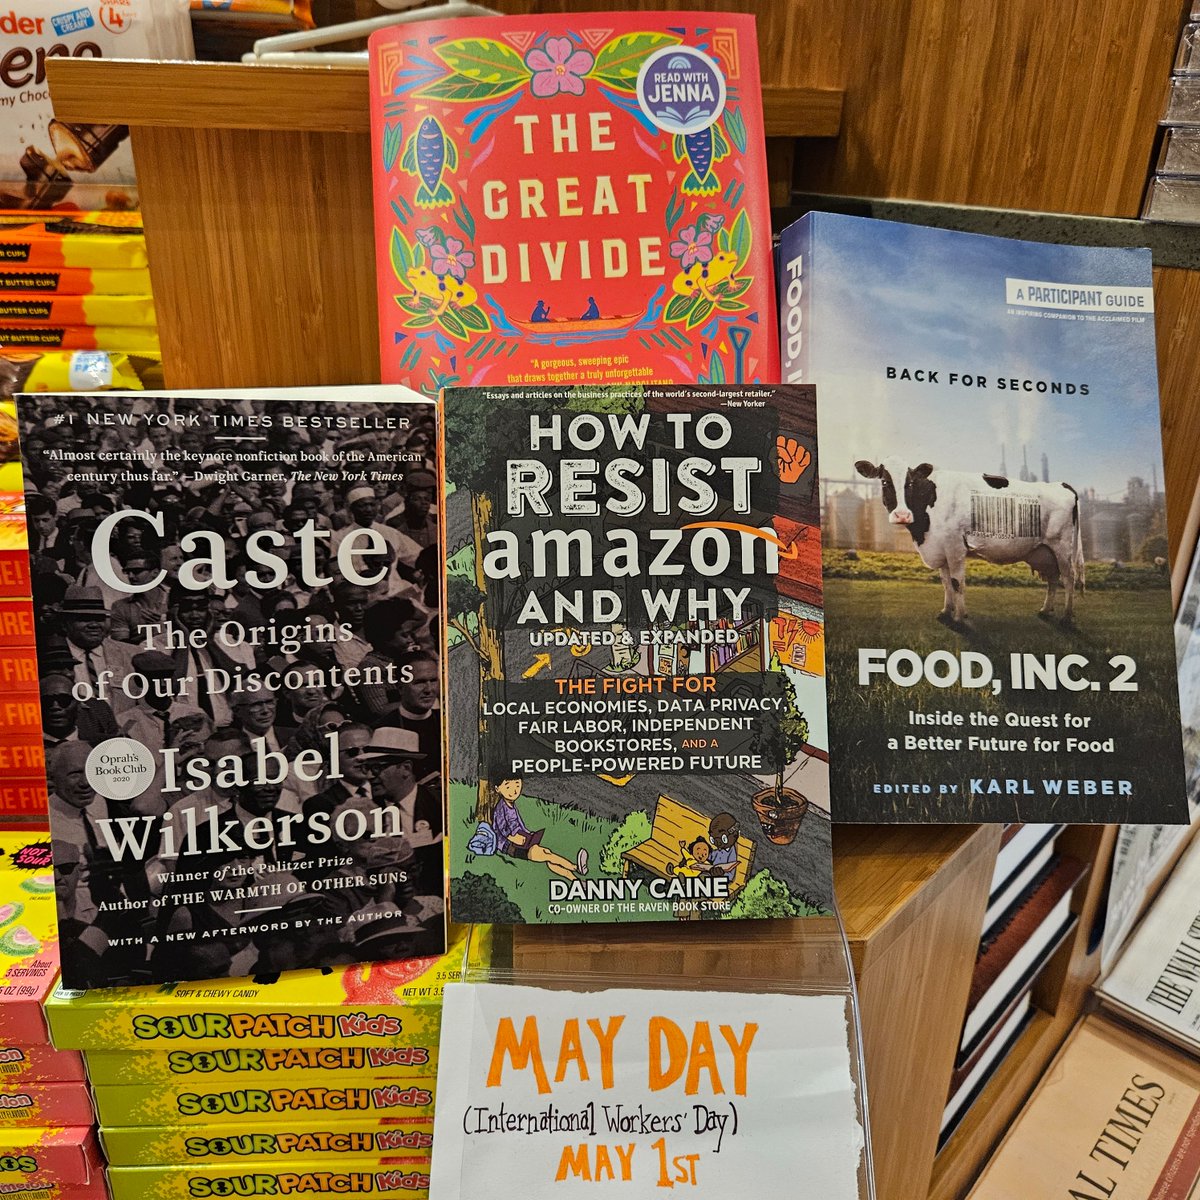 #MayDay, May Day! Celebrate #InternationalWorkersDay with these reads:

#IndependentBookstore #WhatsGoodWednesday